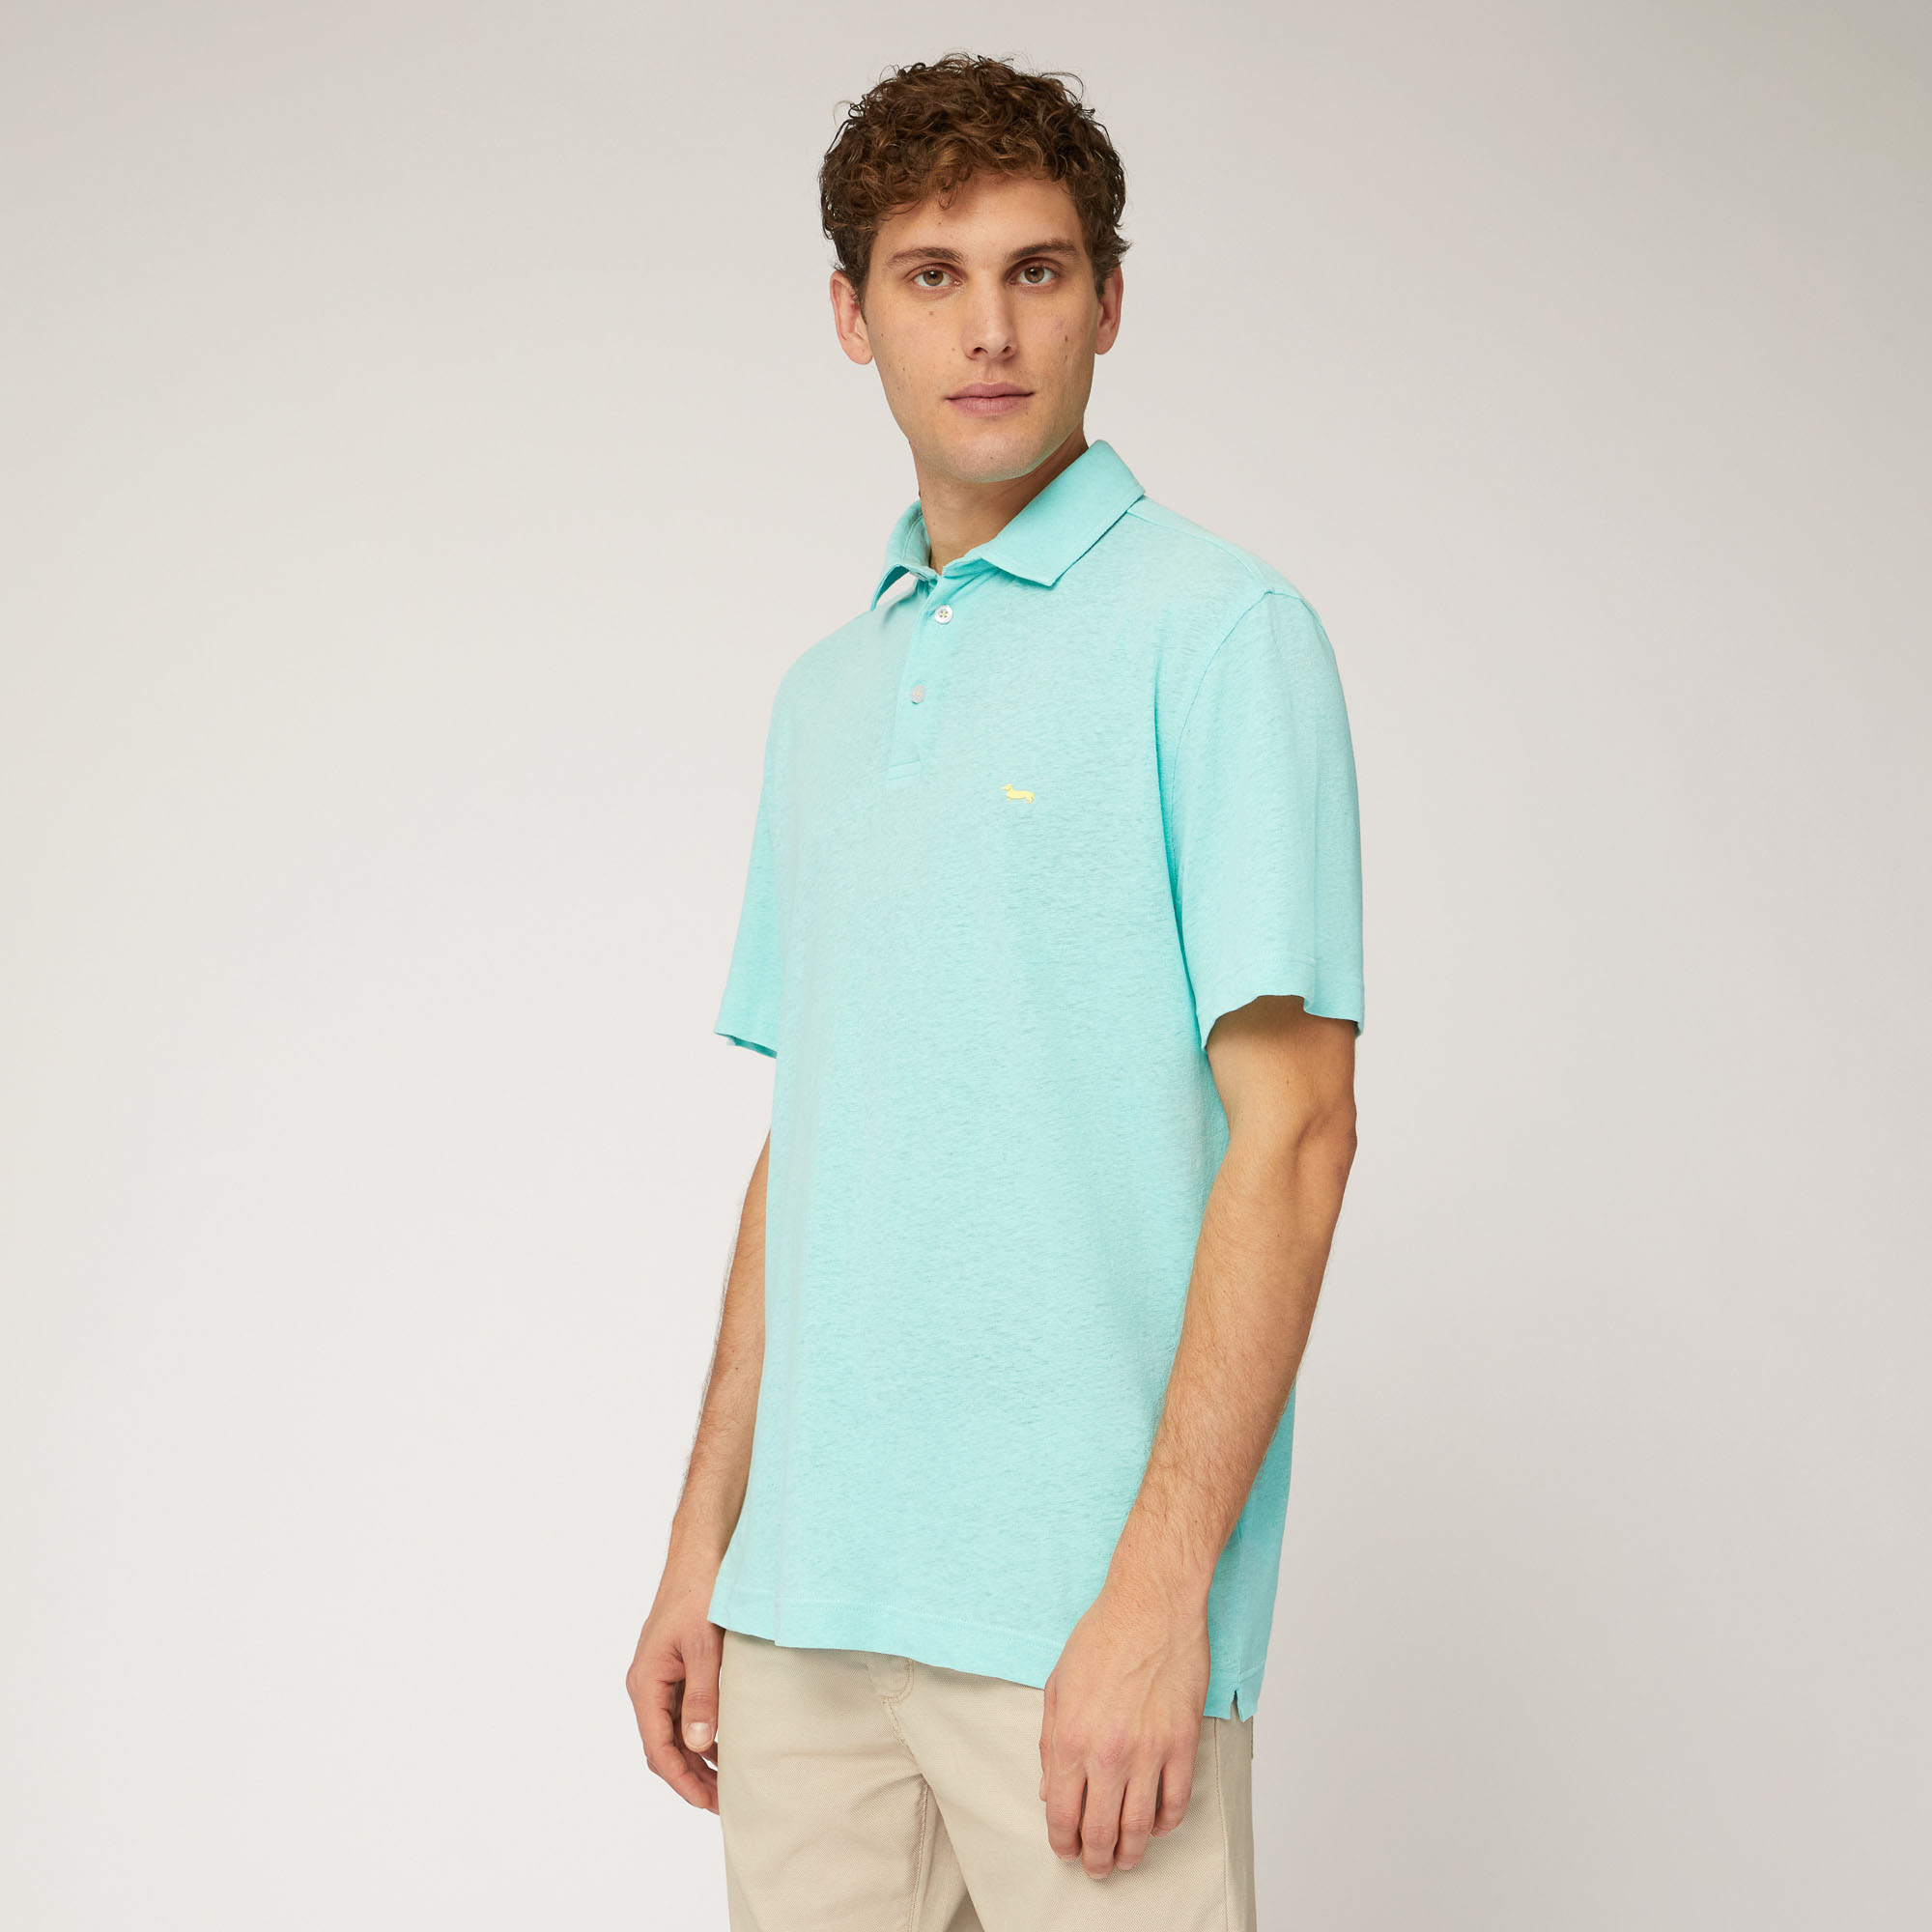 Cotton and Linen Jersey Polo, Light Blue, large image number 0